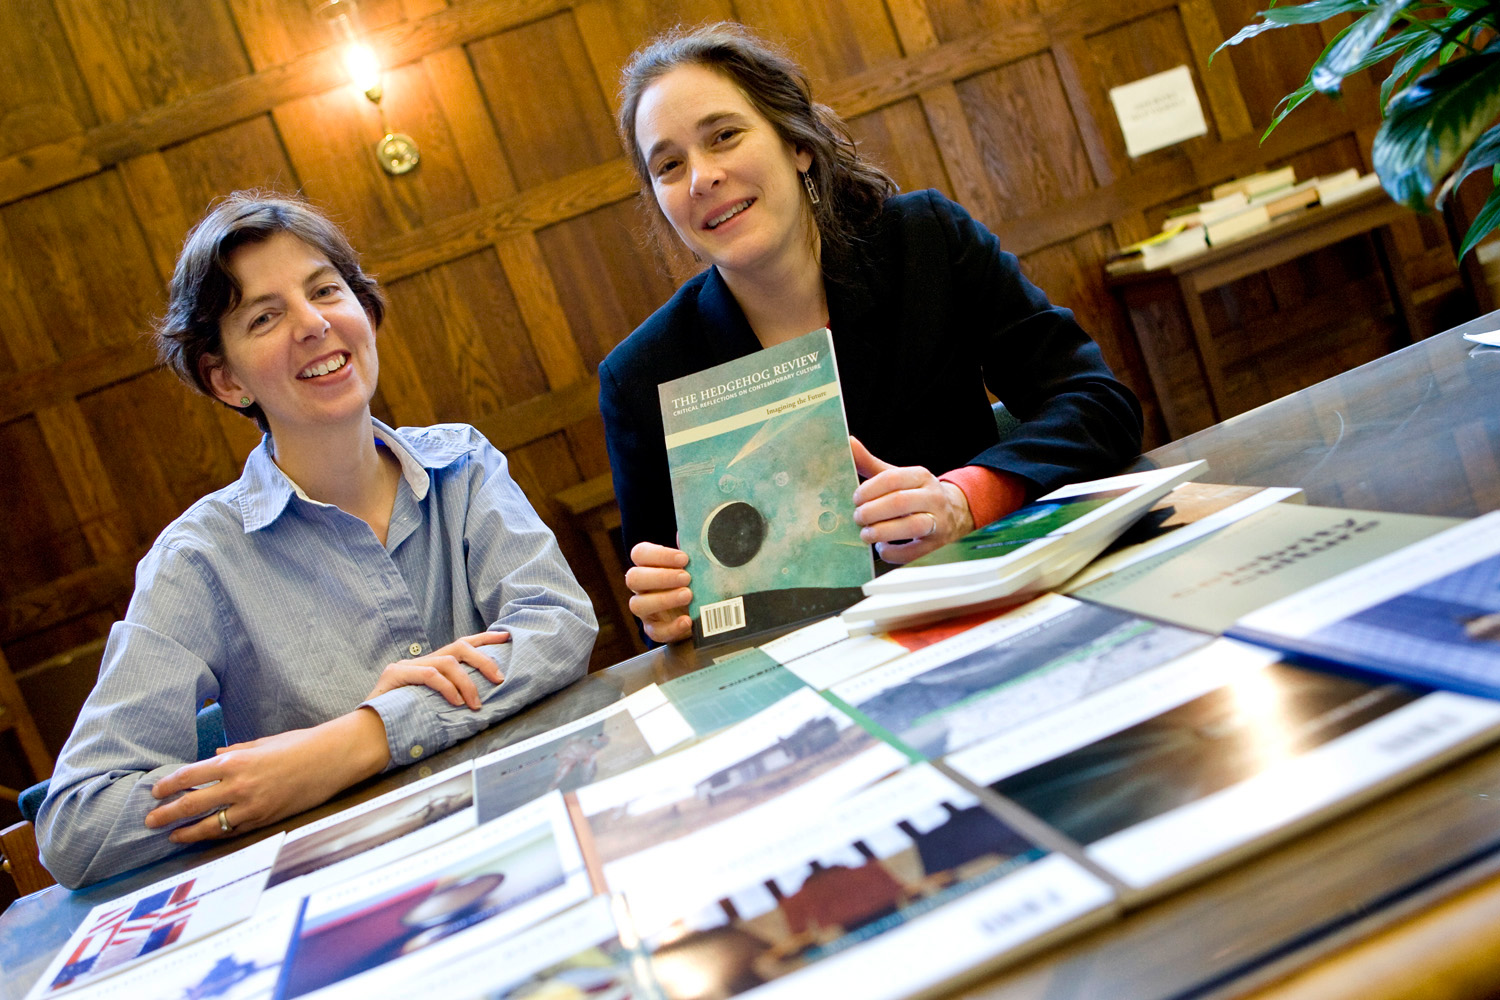 Kristine Harmon and Jennifer Geddes sit at a table together with books covering the table